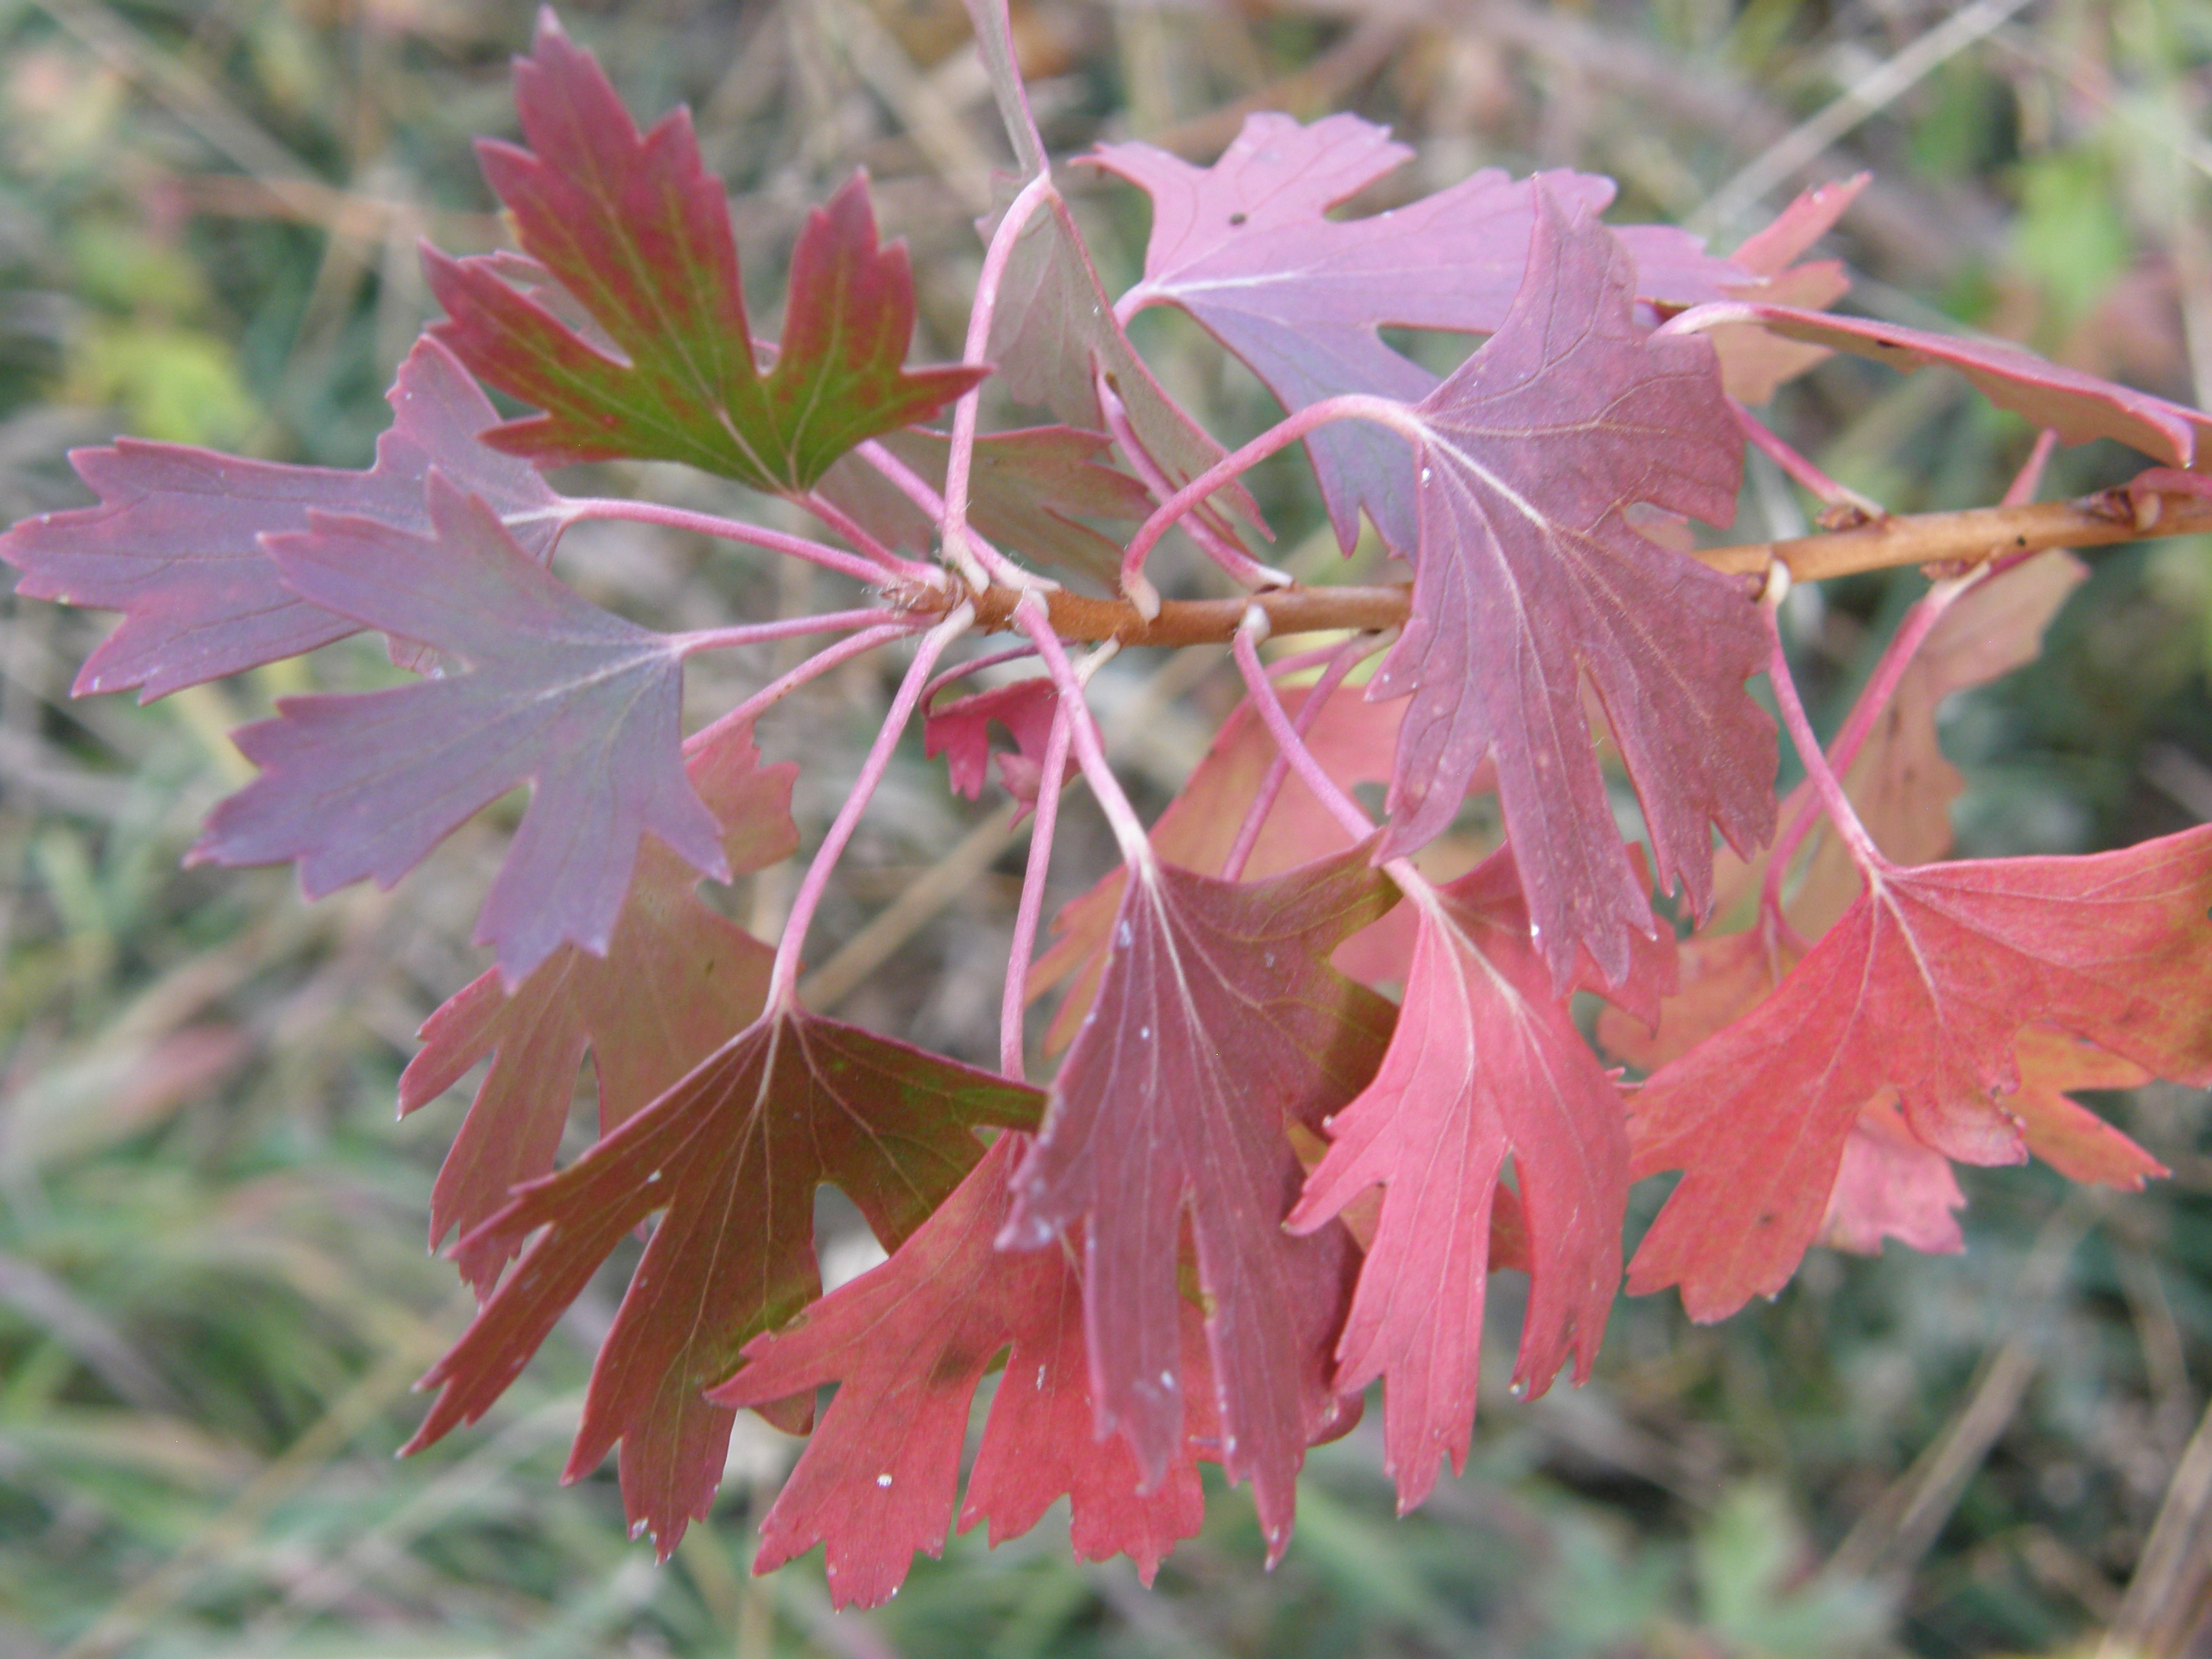 Red currant leaves.